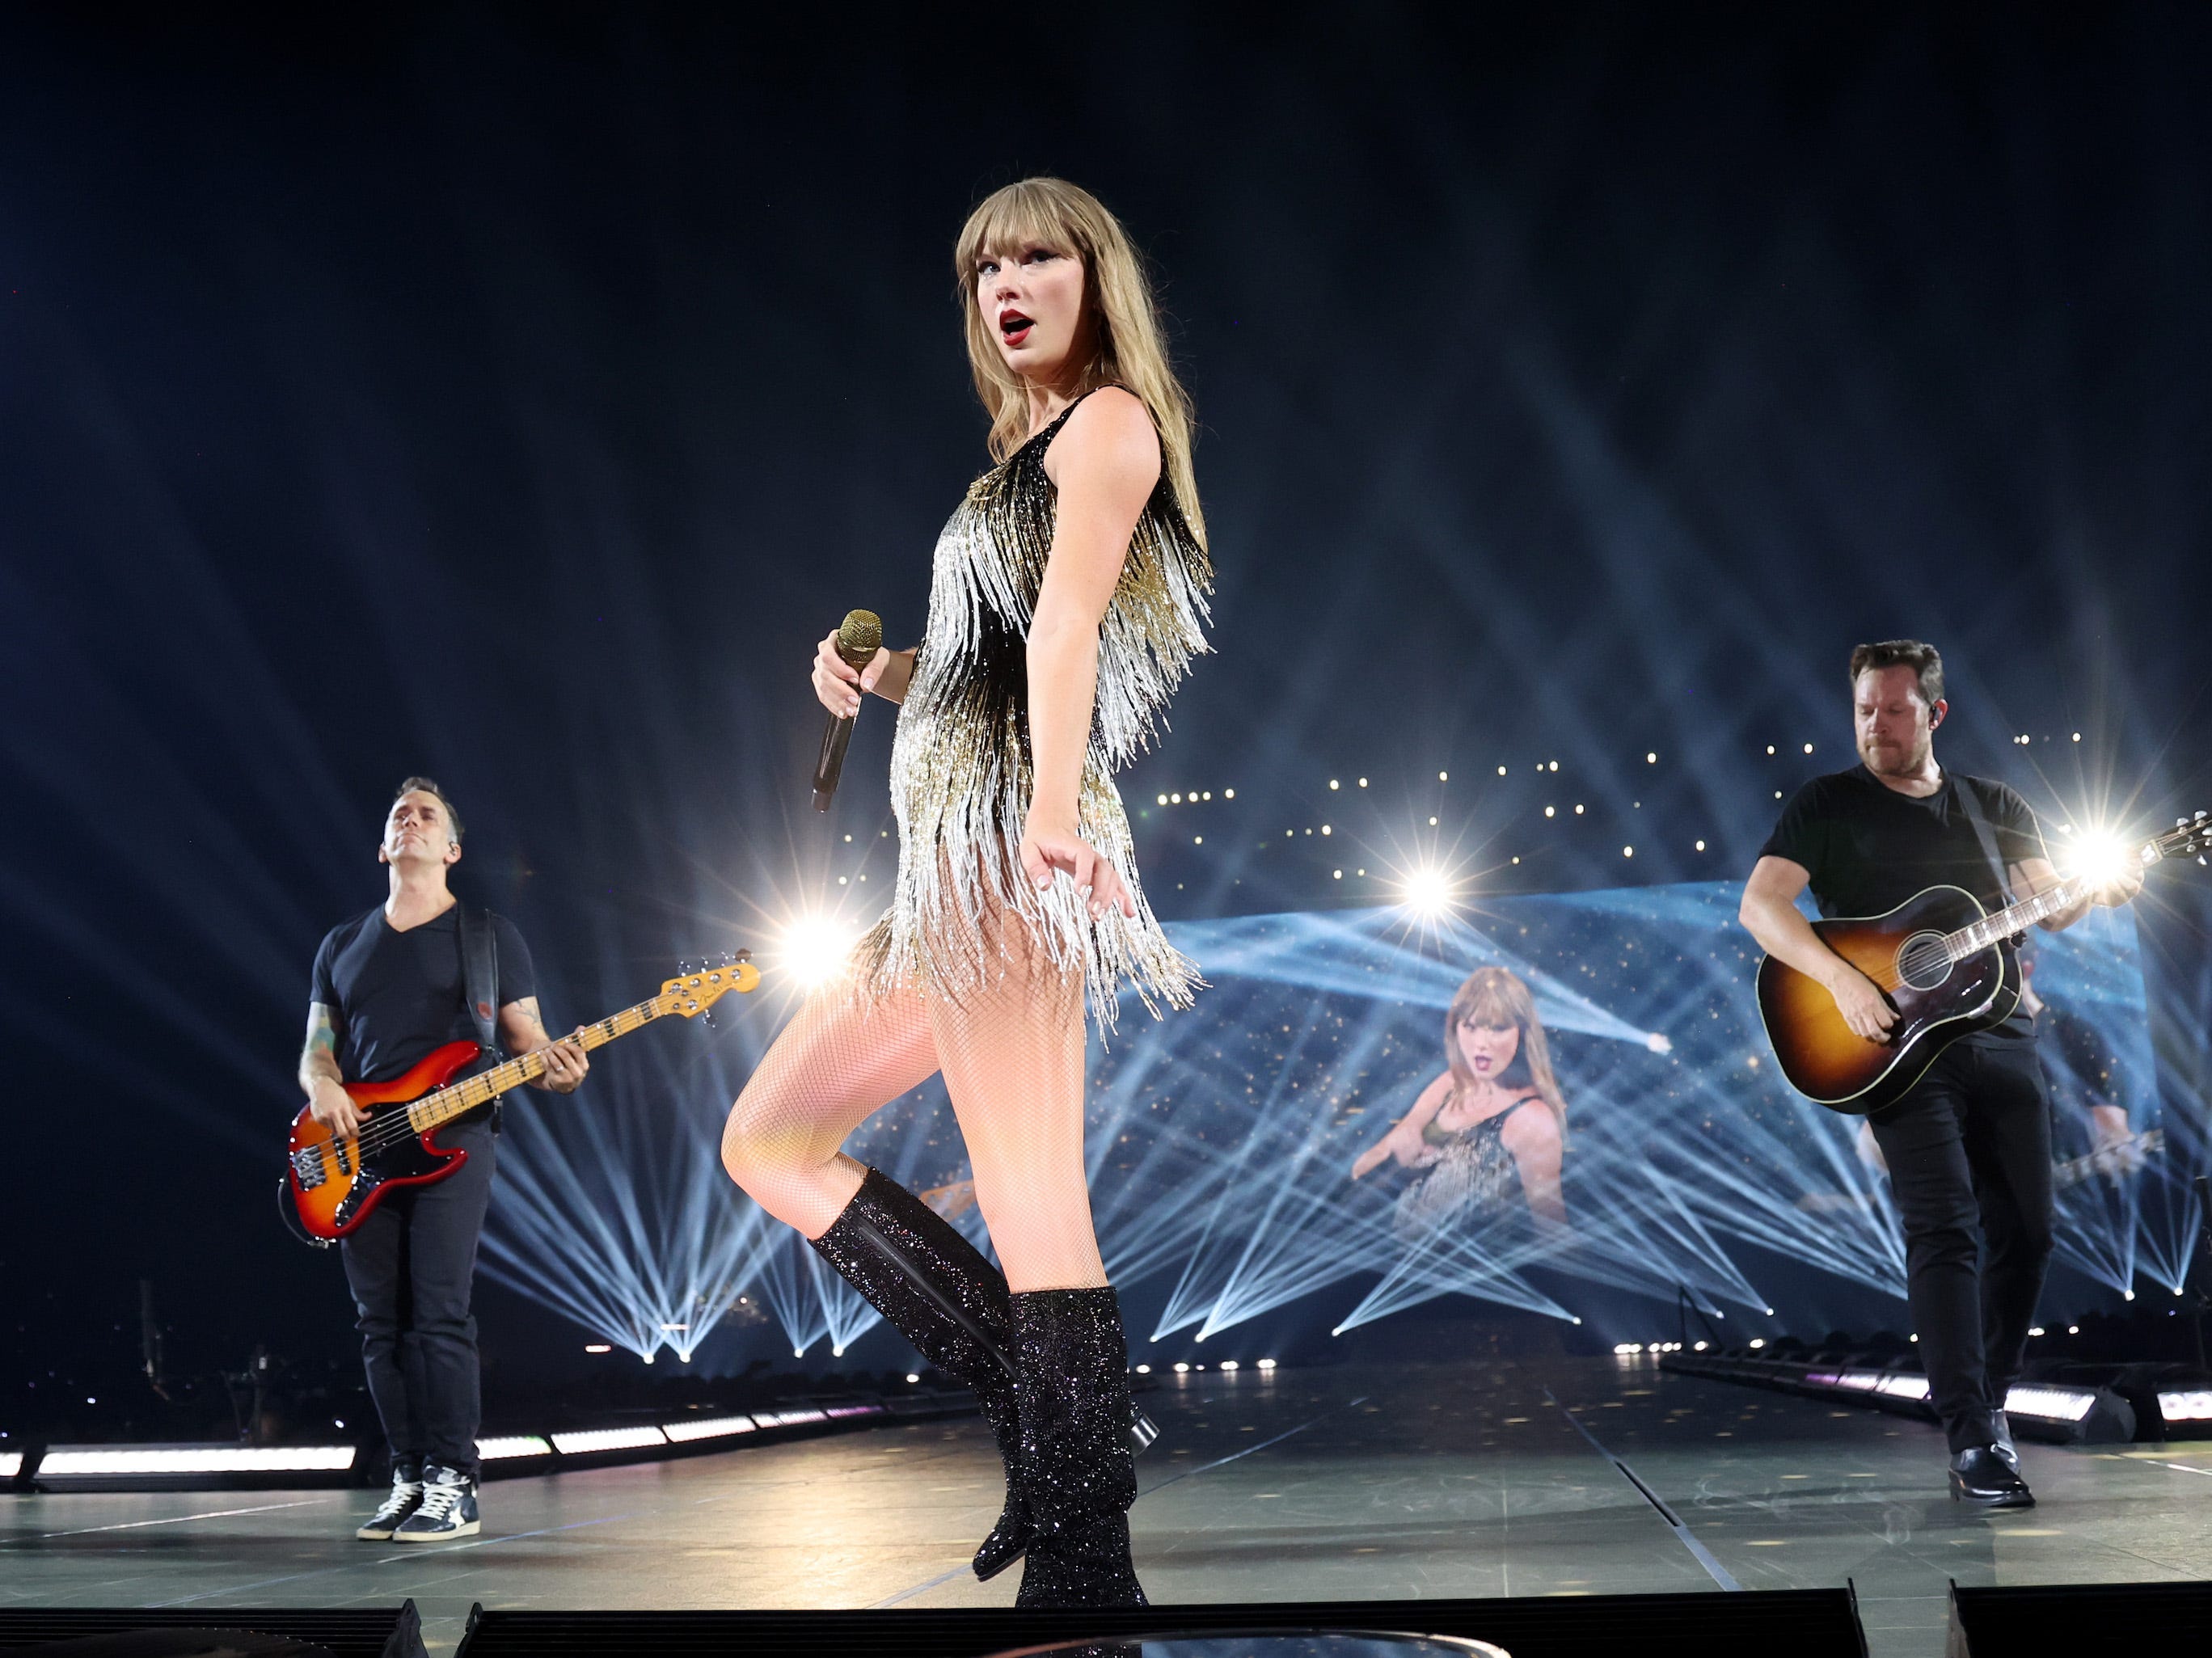 <p>The newest "Fearless" look that Swift debuted in France is a solid, mid-tier choice. It's much better than the era's stringy options, though it doesn't measure up to the original fringe-covered mini dress.</p>